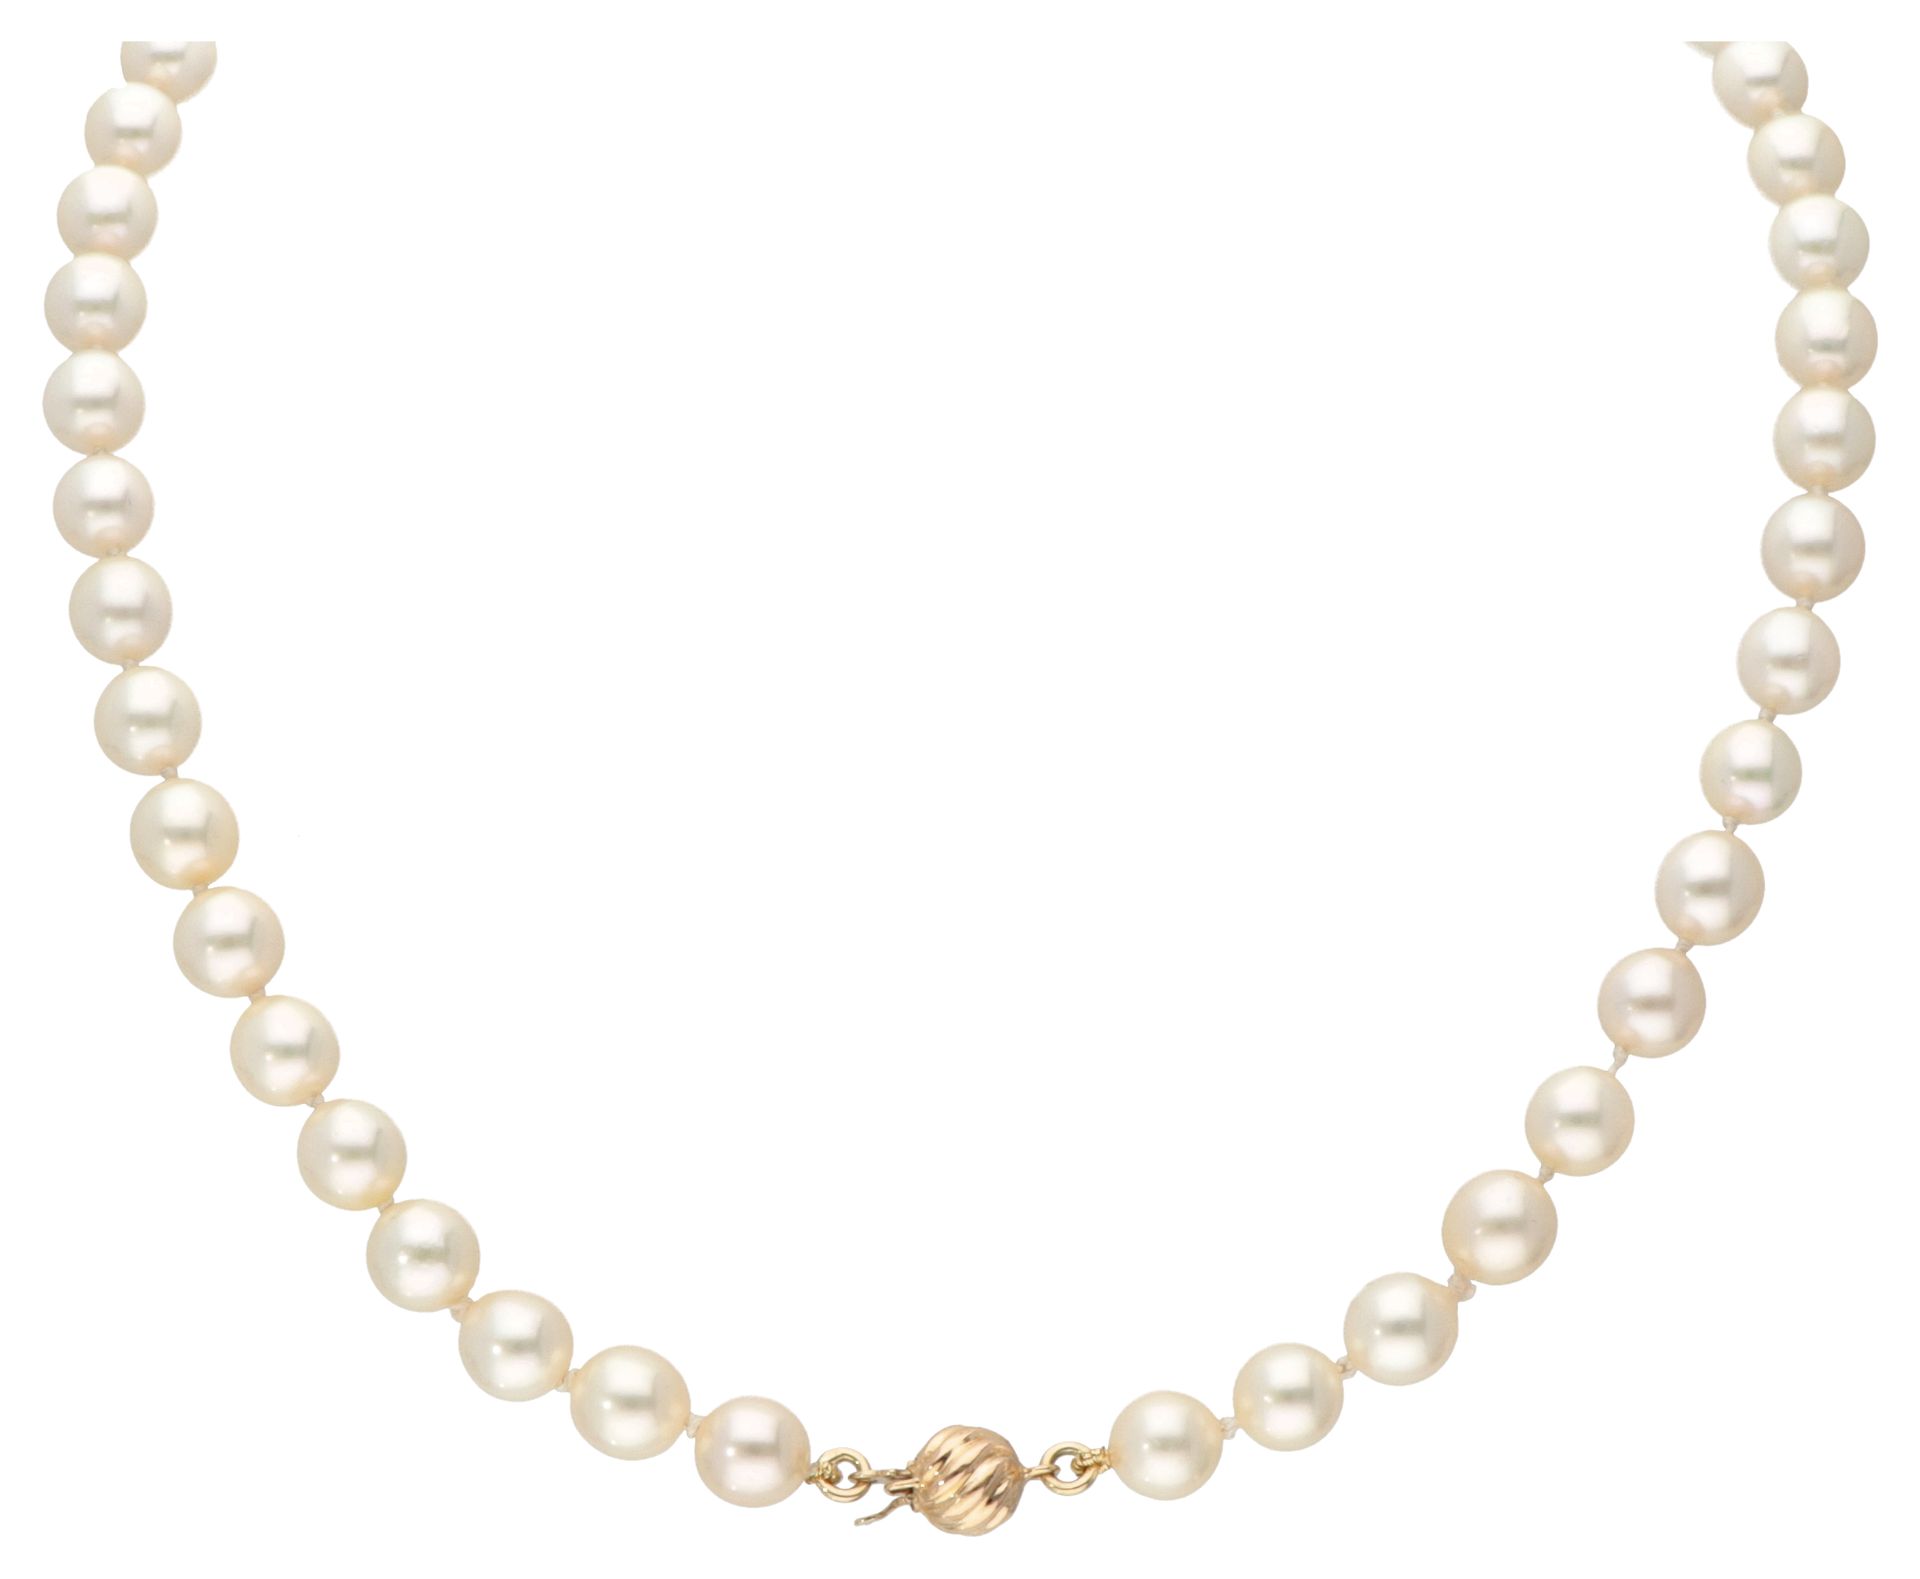 Saltwater pearl necklace with a 14K. Yellow gold closure. Sellos: 585. En muy bu&hellip;